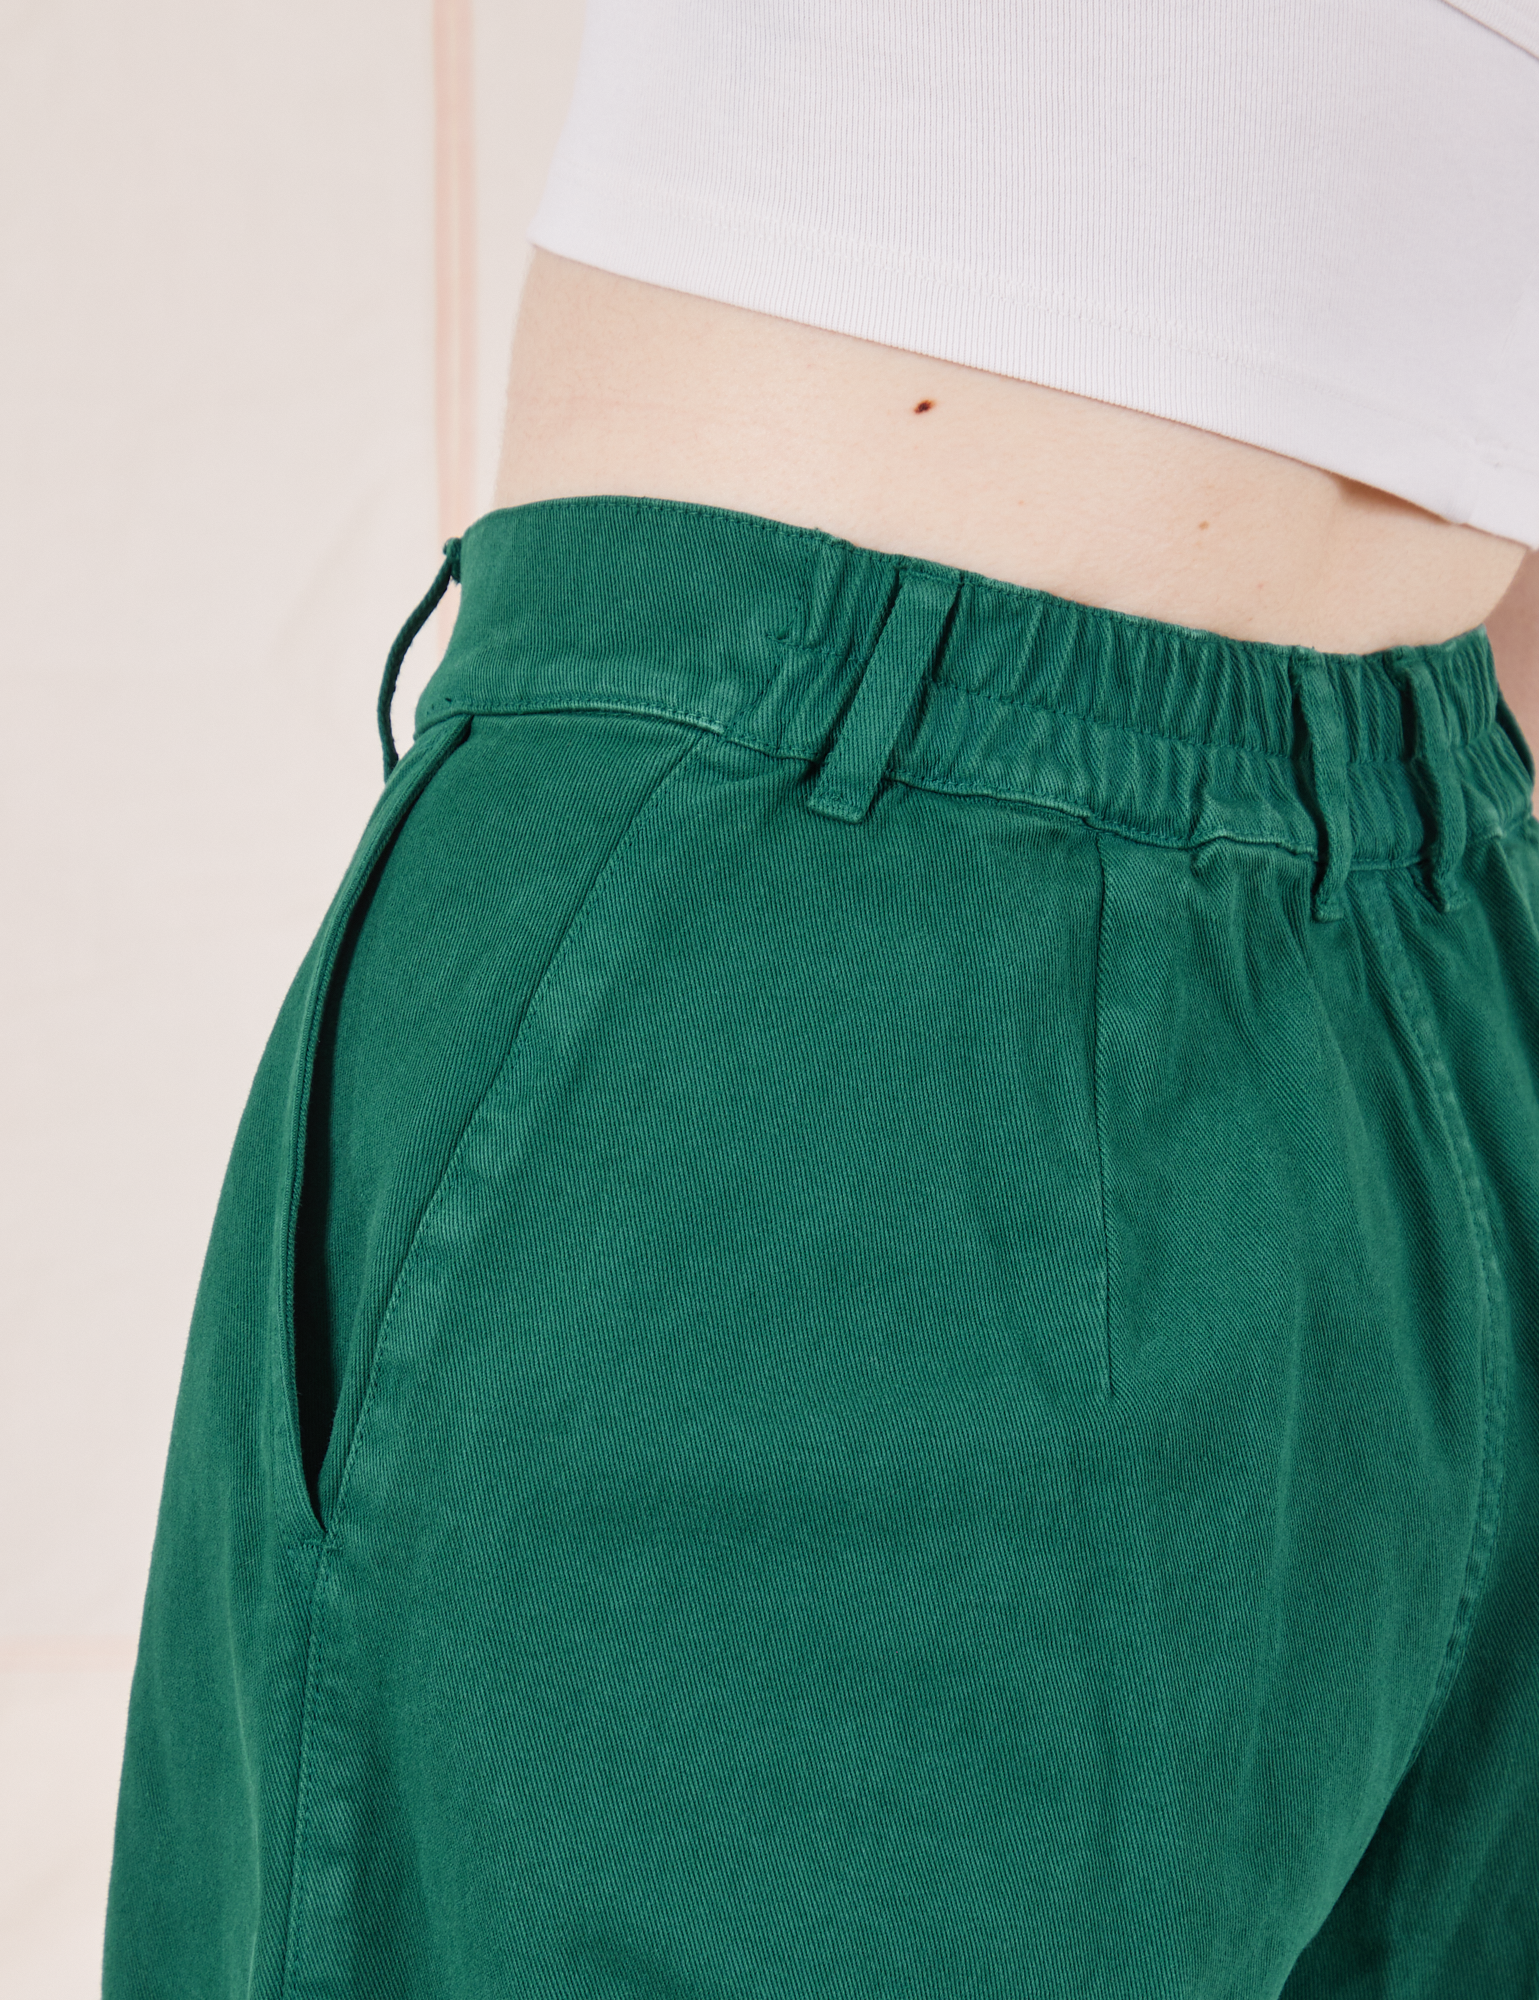 Back close up of elastic waistband of Heavyweight Trousers in Hunter Green on Hana